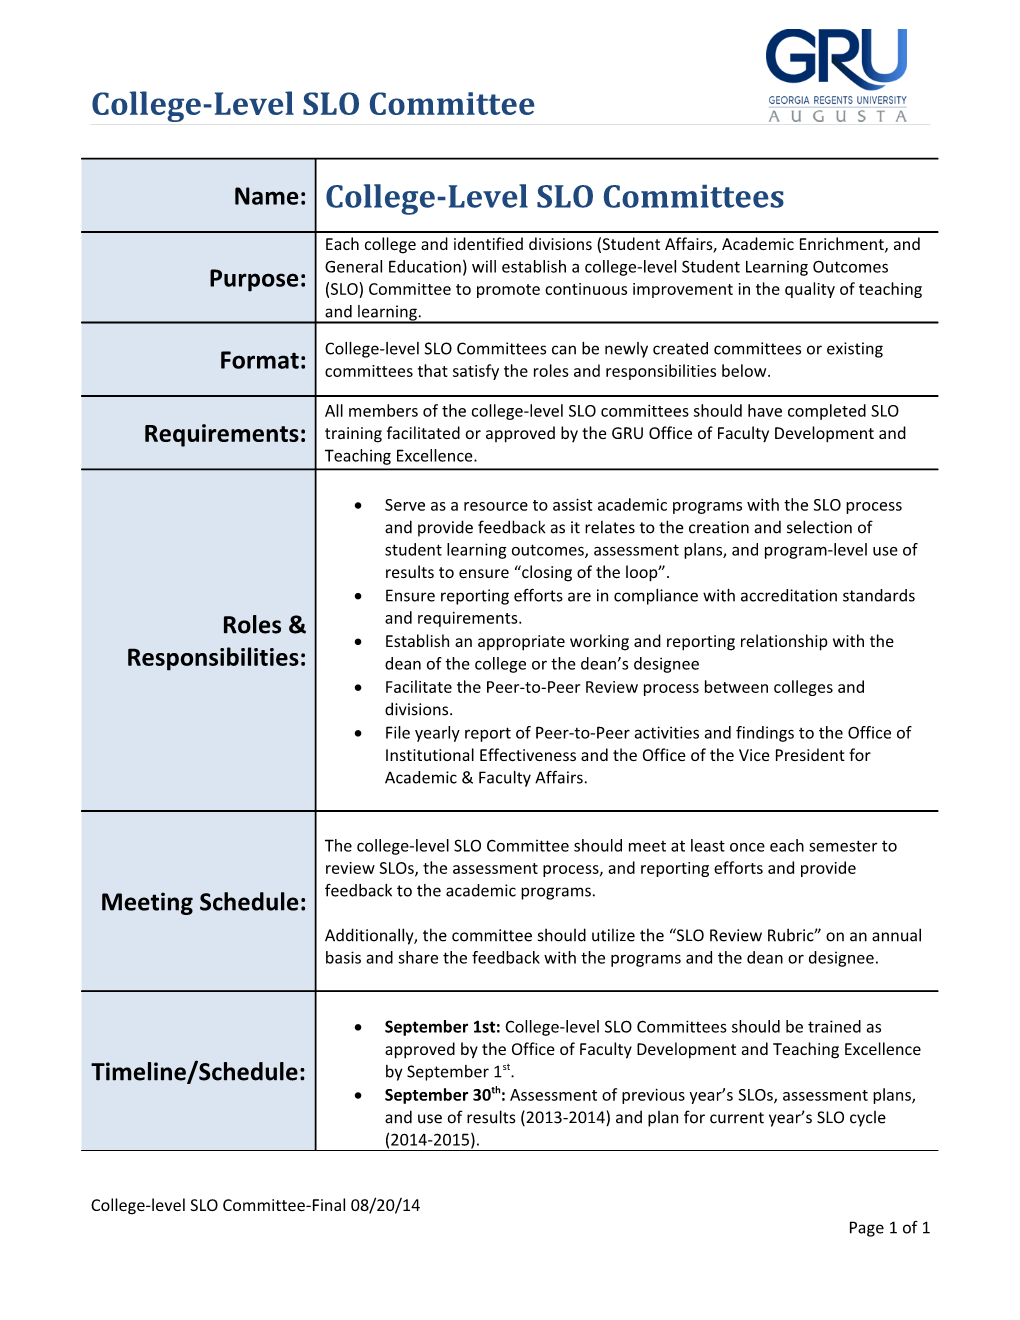 College-Level SLO Committee